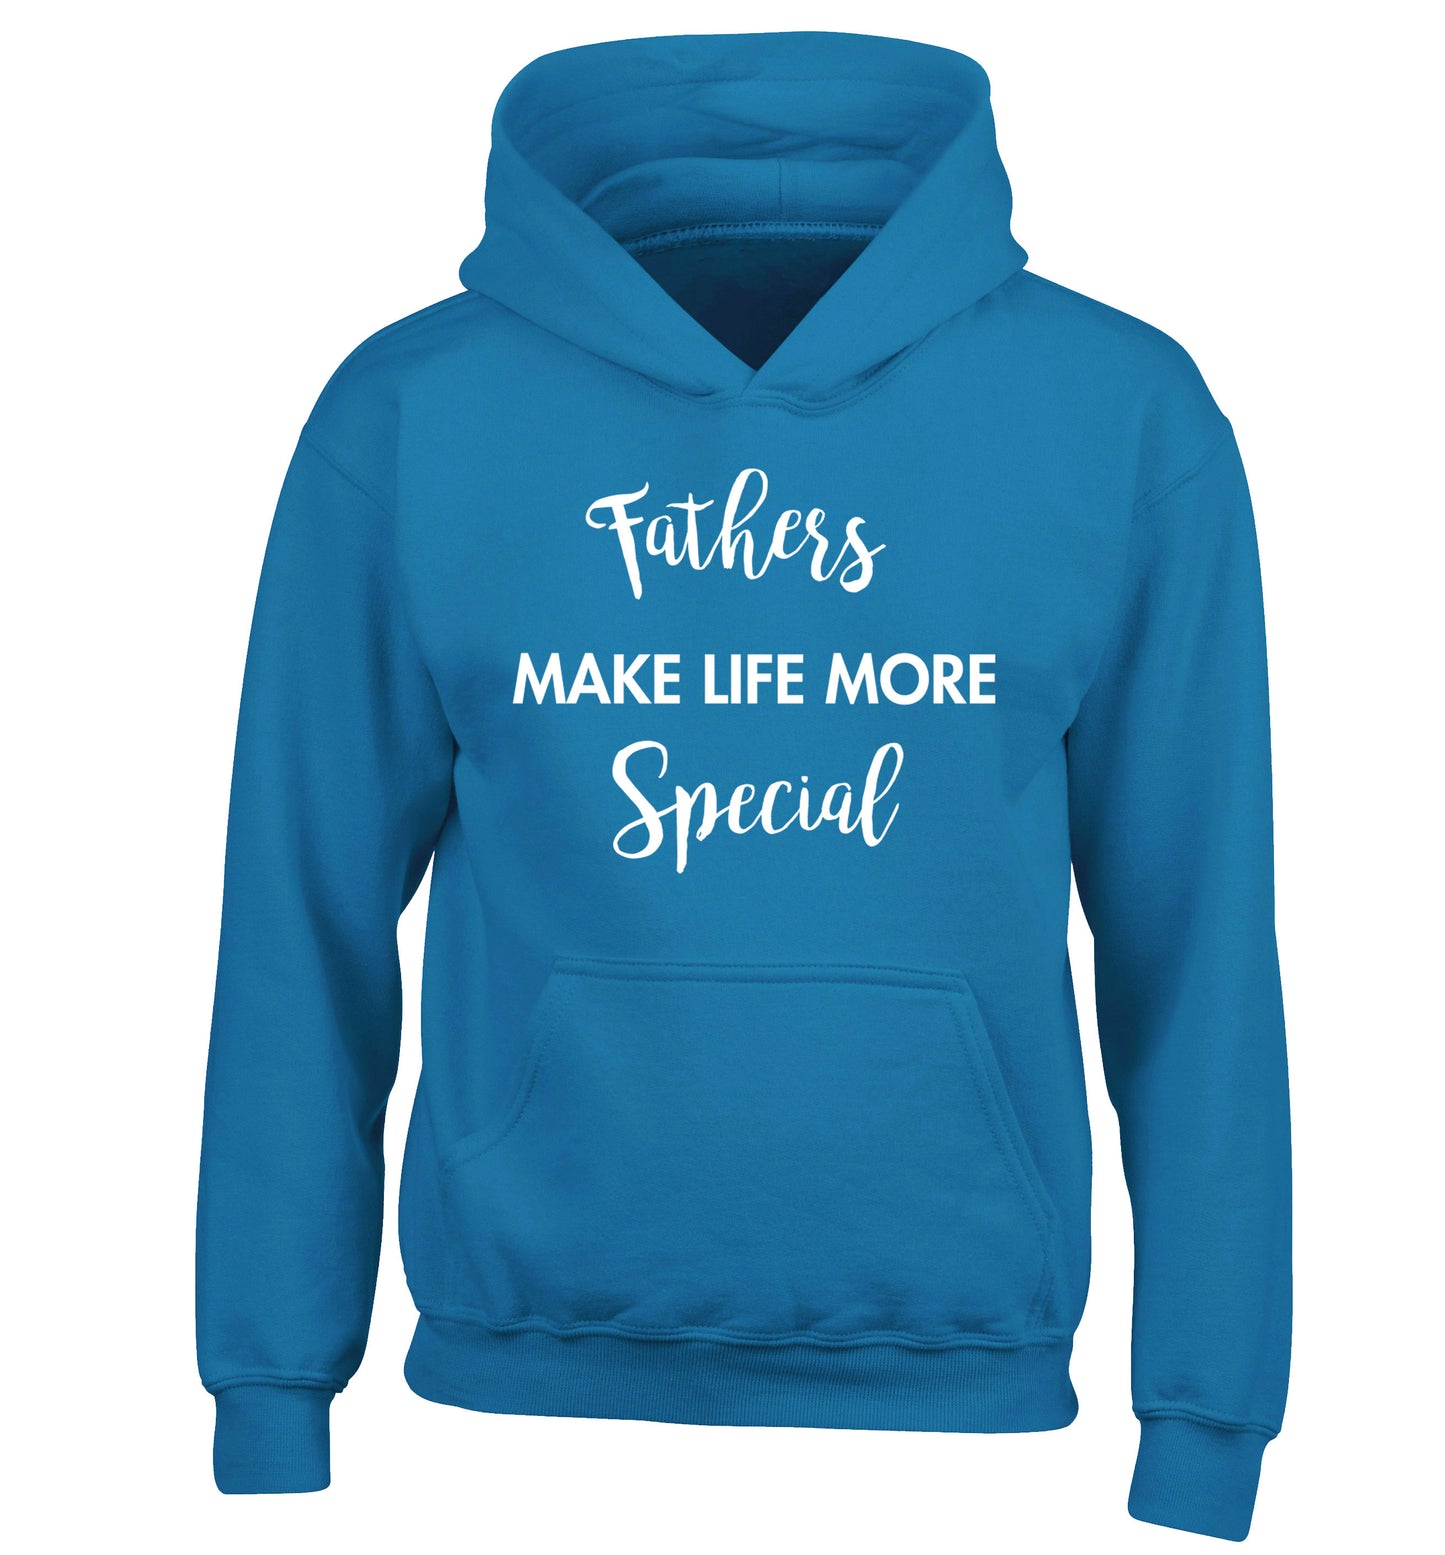 Fathers make life more special children's blue hoodie 12-14 Years